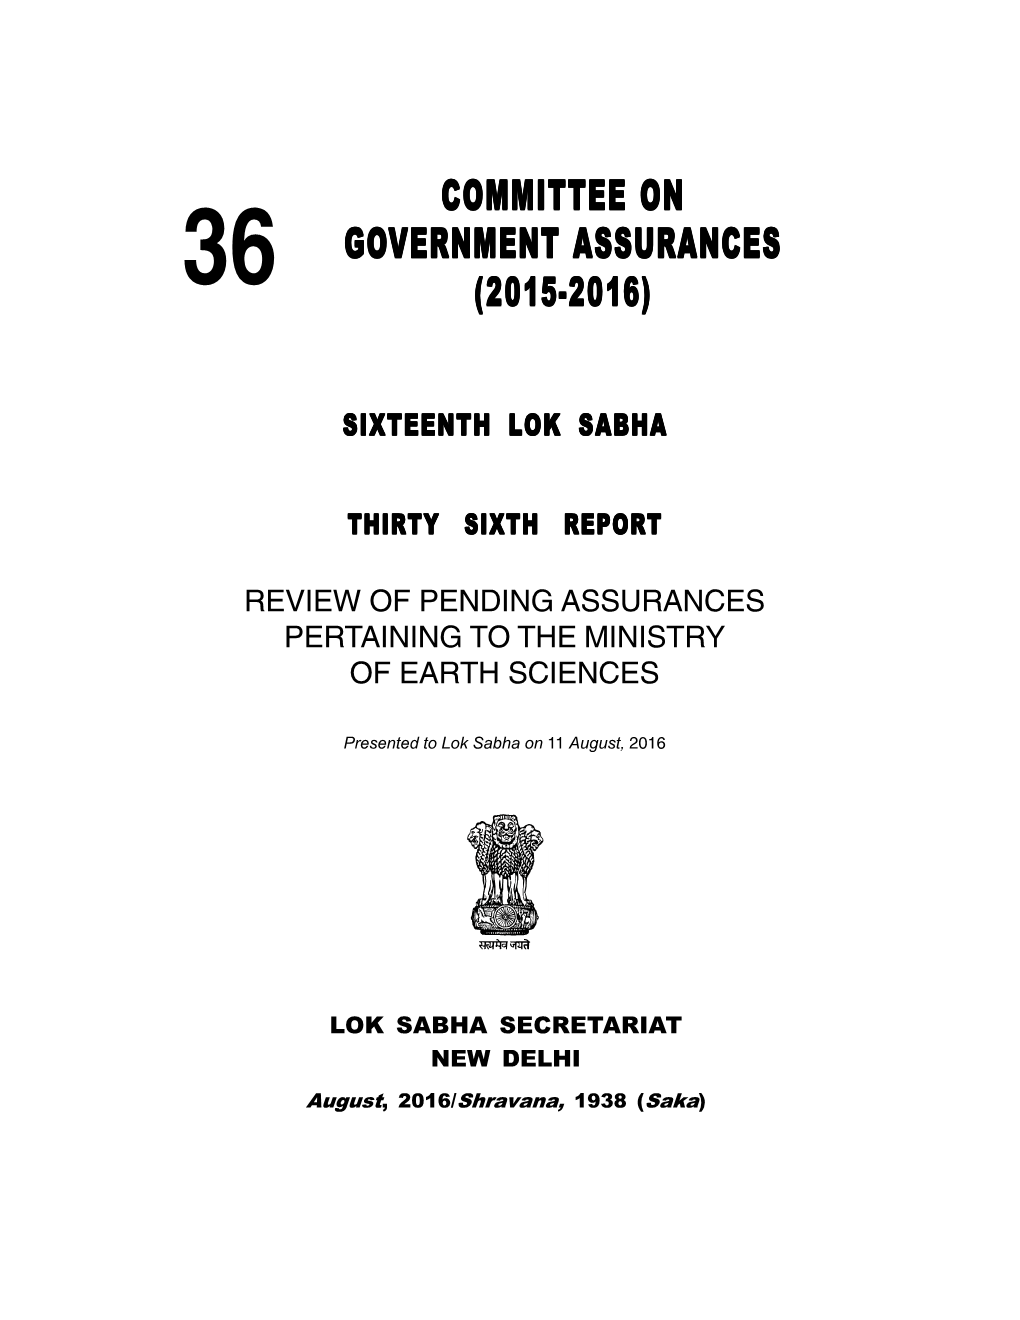 Committee on Government Vernment Vernment